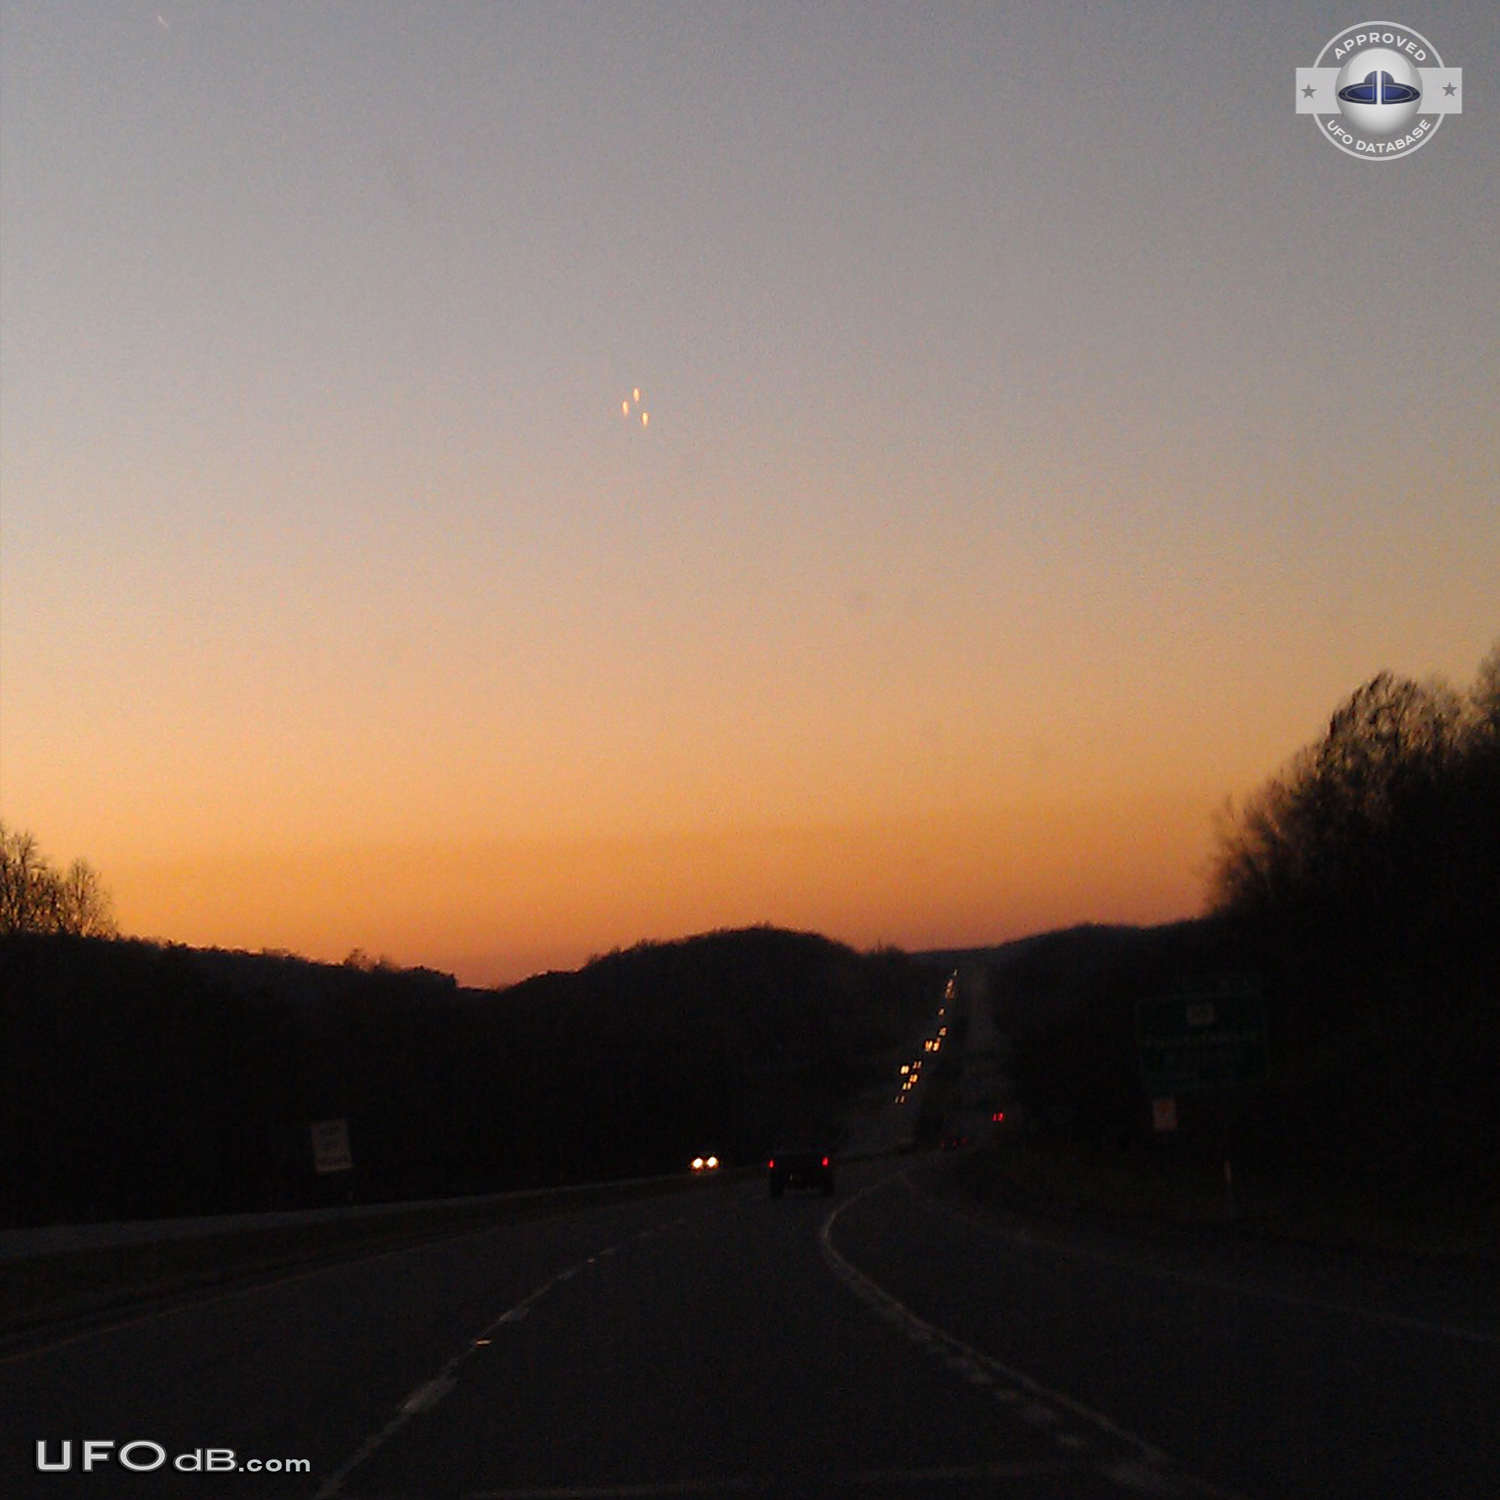 UFO orbs in Triangle formation over Nuclear plant in Pennsylvania 2012 UFO Picture #528-1